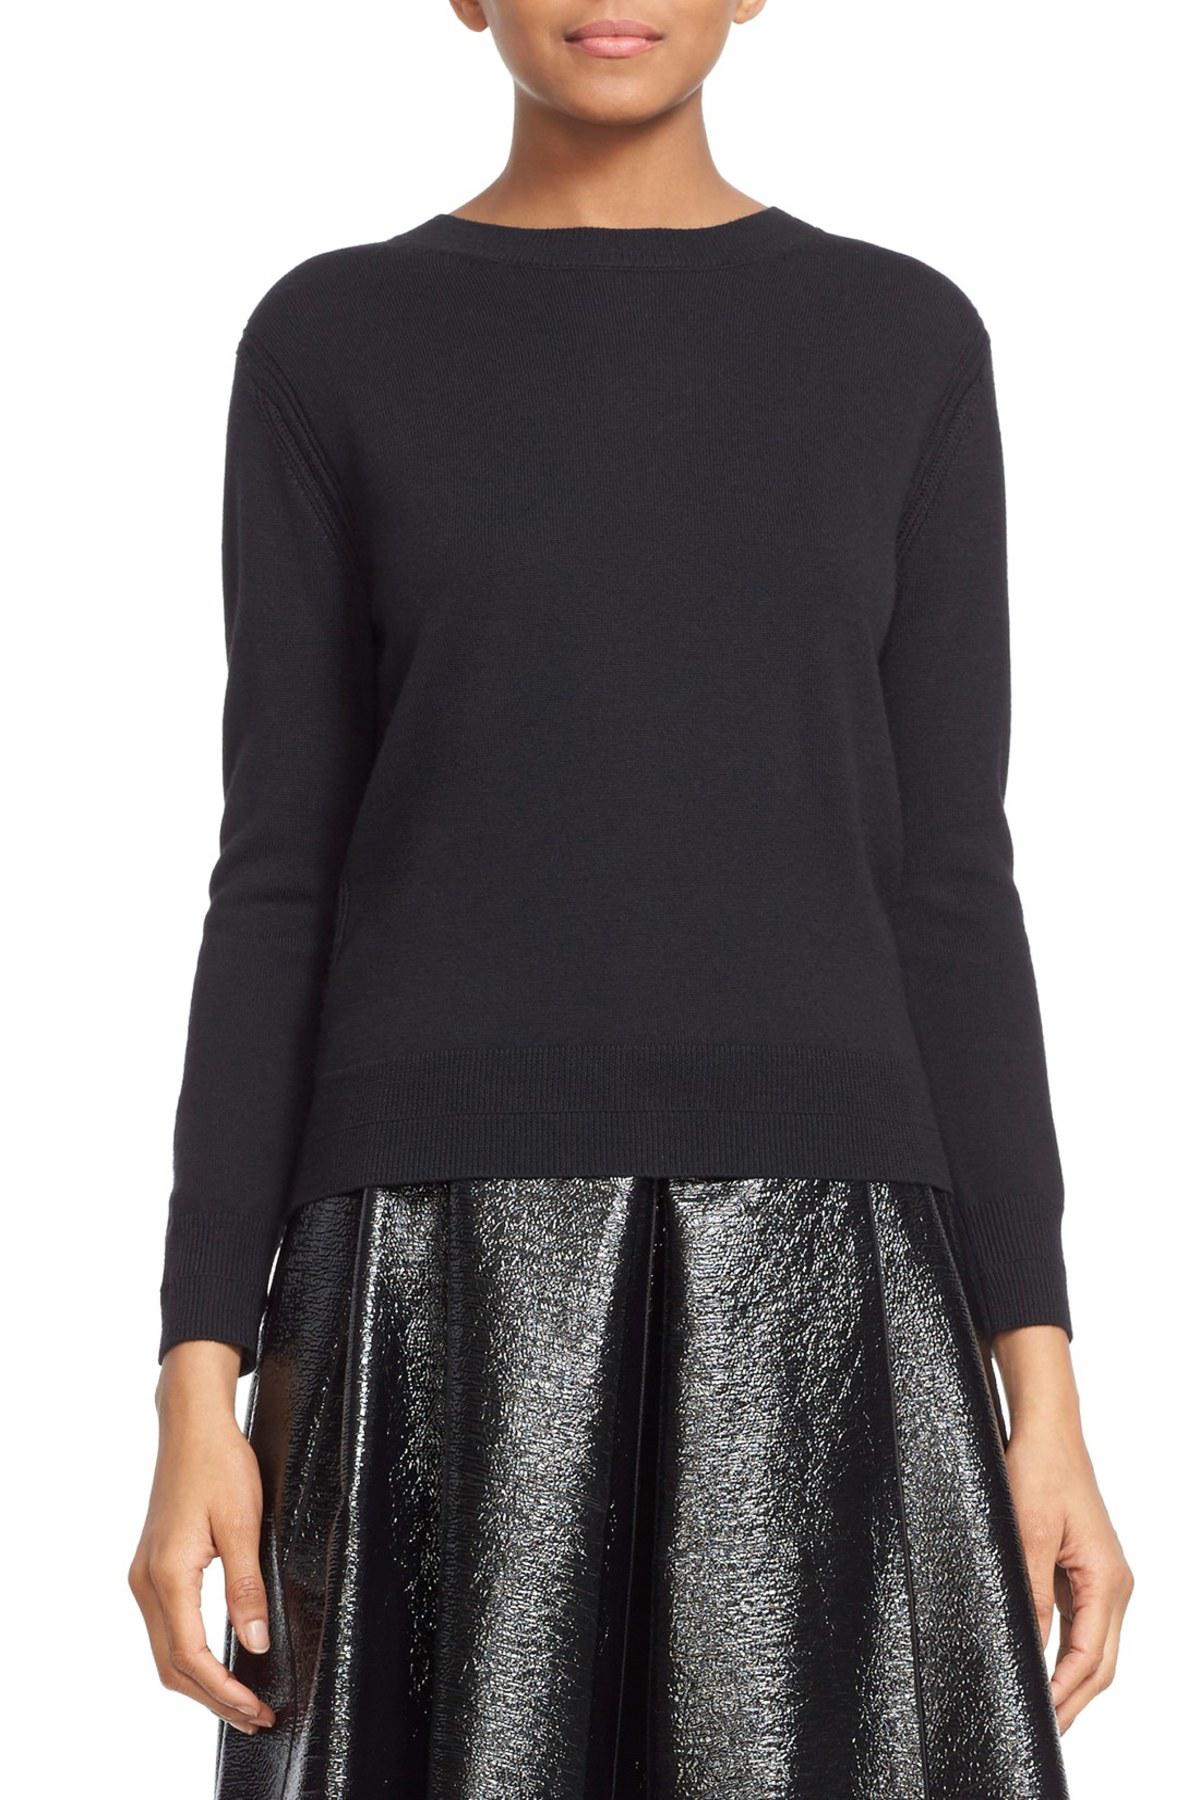 Marc Jacobs Back Button Detail Merino Wool Sweater in Black - Lyst